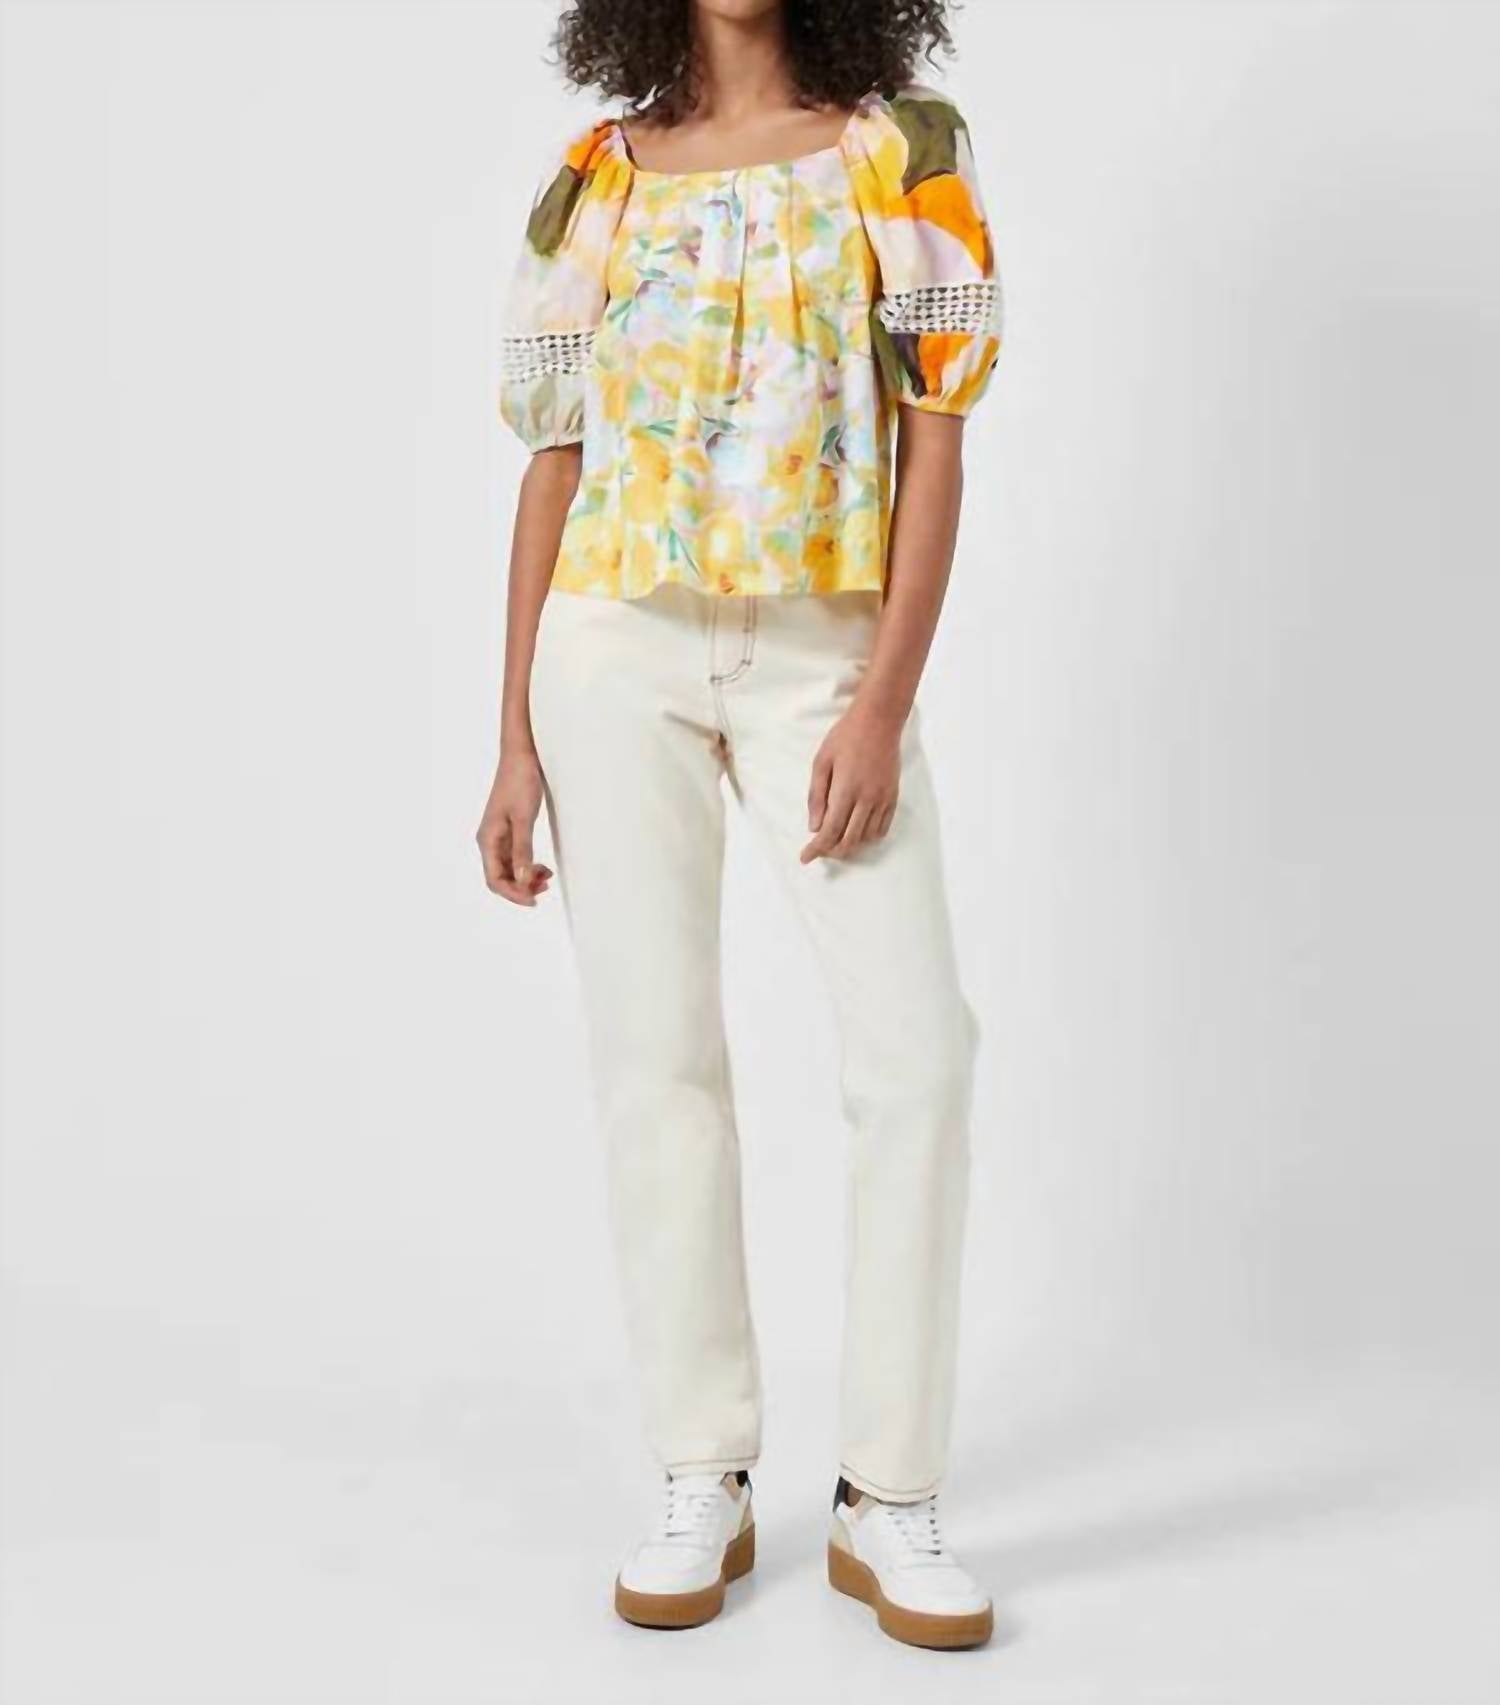 FRENCH CONNECTION Isadora Patch Organic Poplin Bardot Top in Golden Glaze/Beeswax